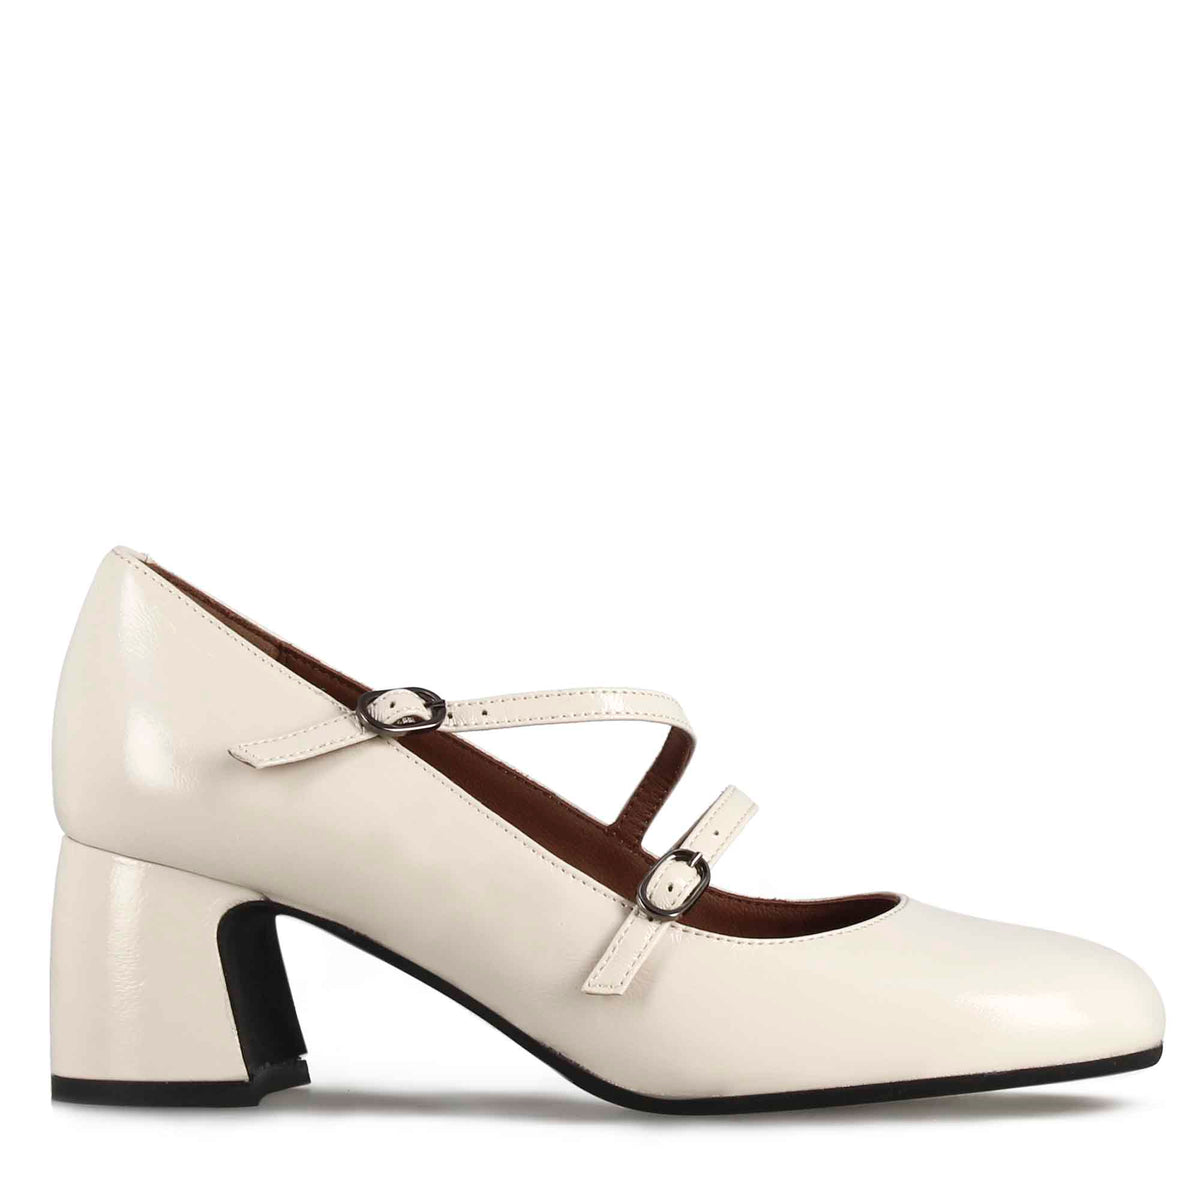 Mary Jane décolleté in beige patent leather with double strap